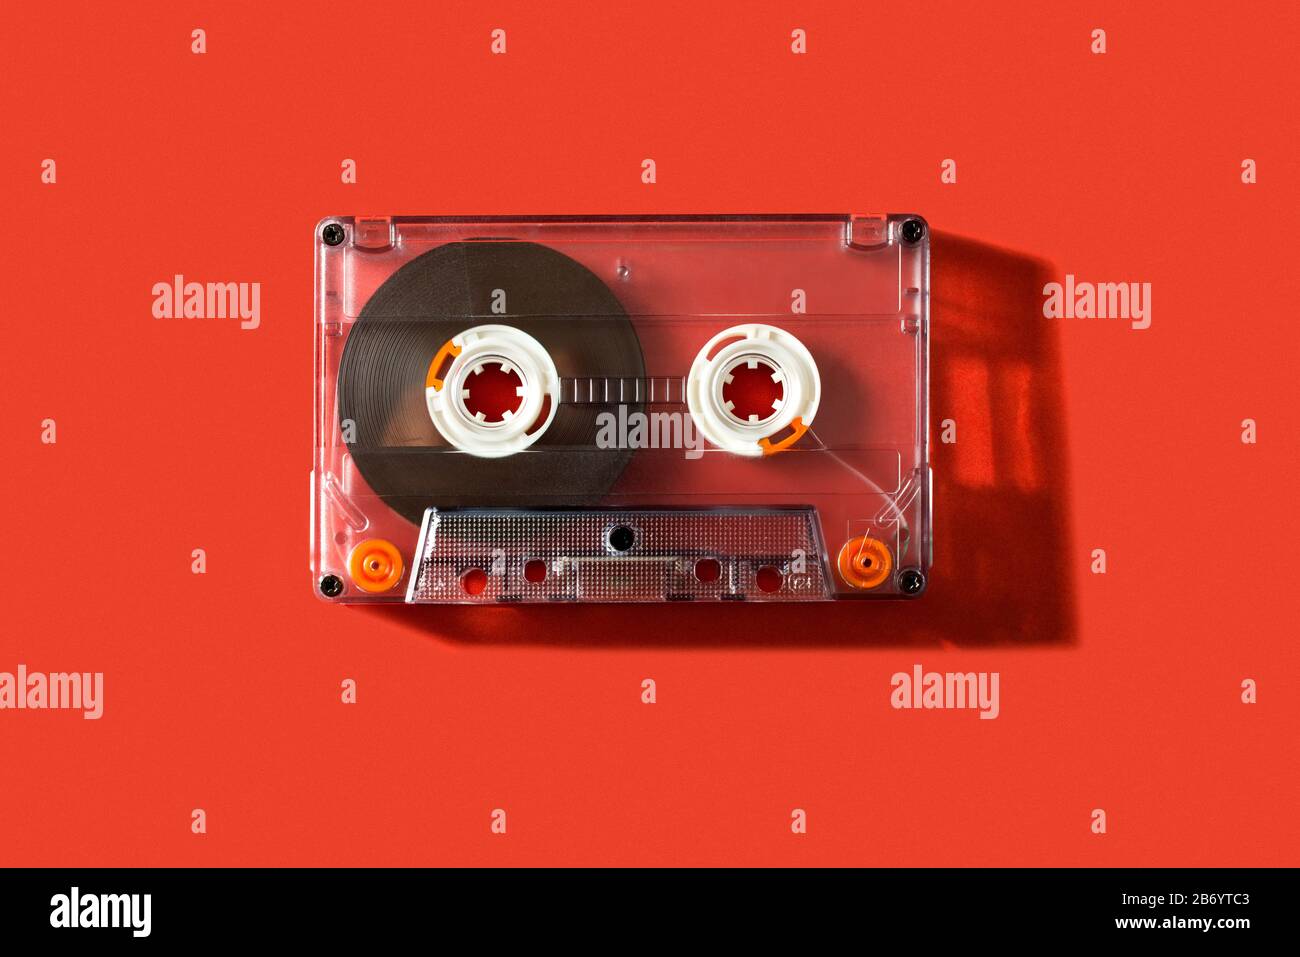 Old vintage cassette tape on a red background Stock Photo